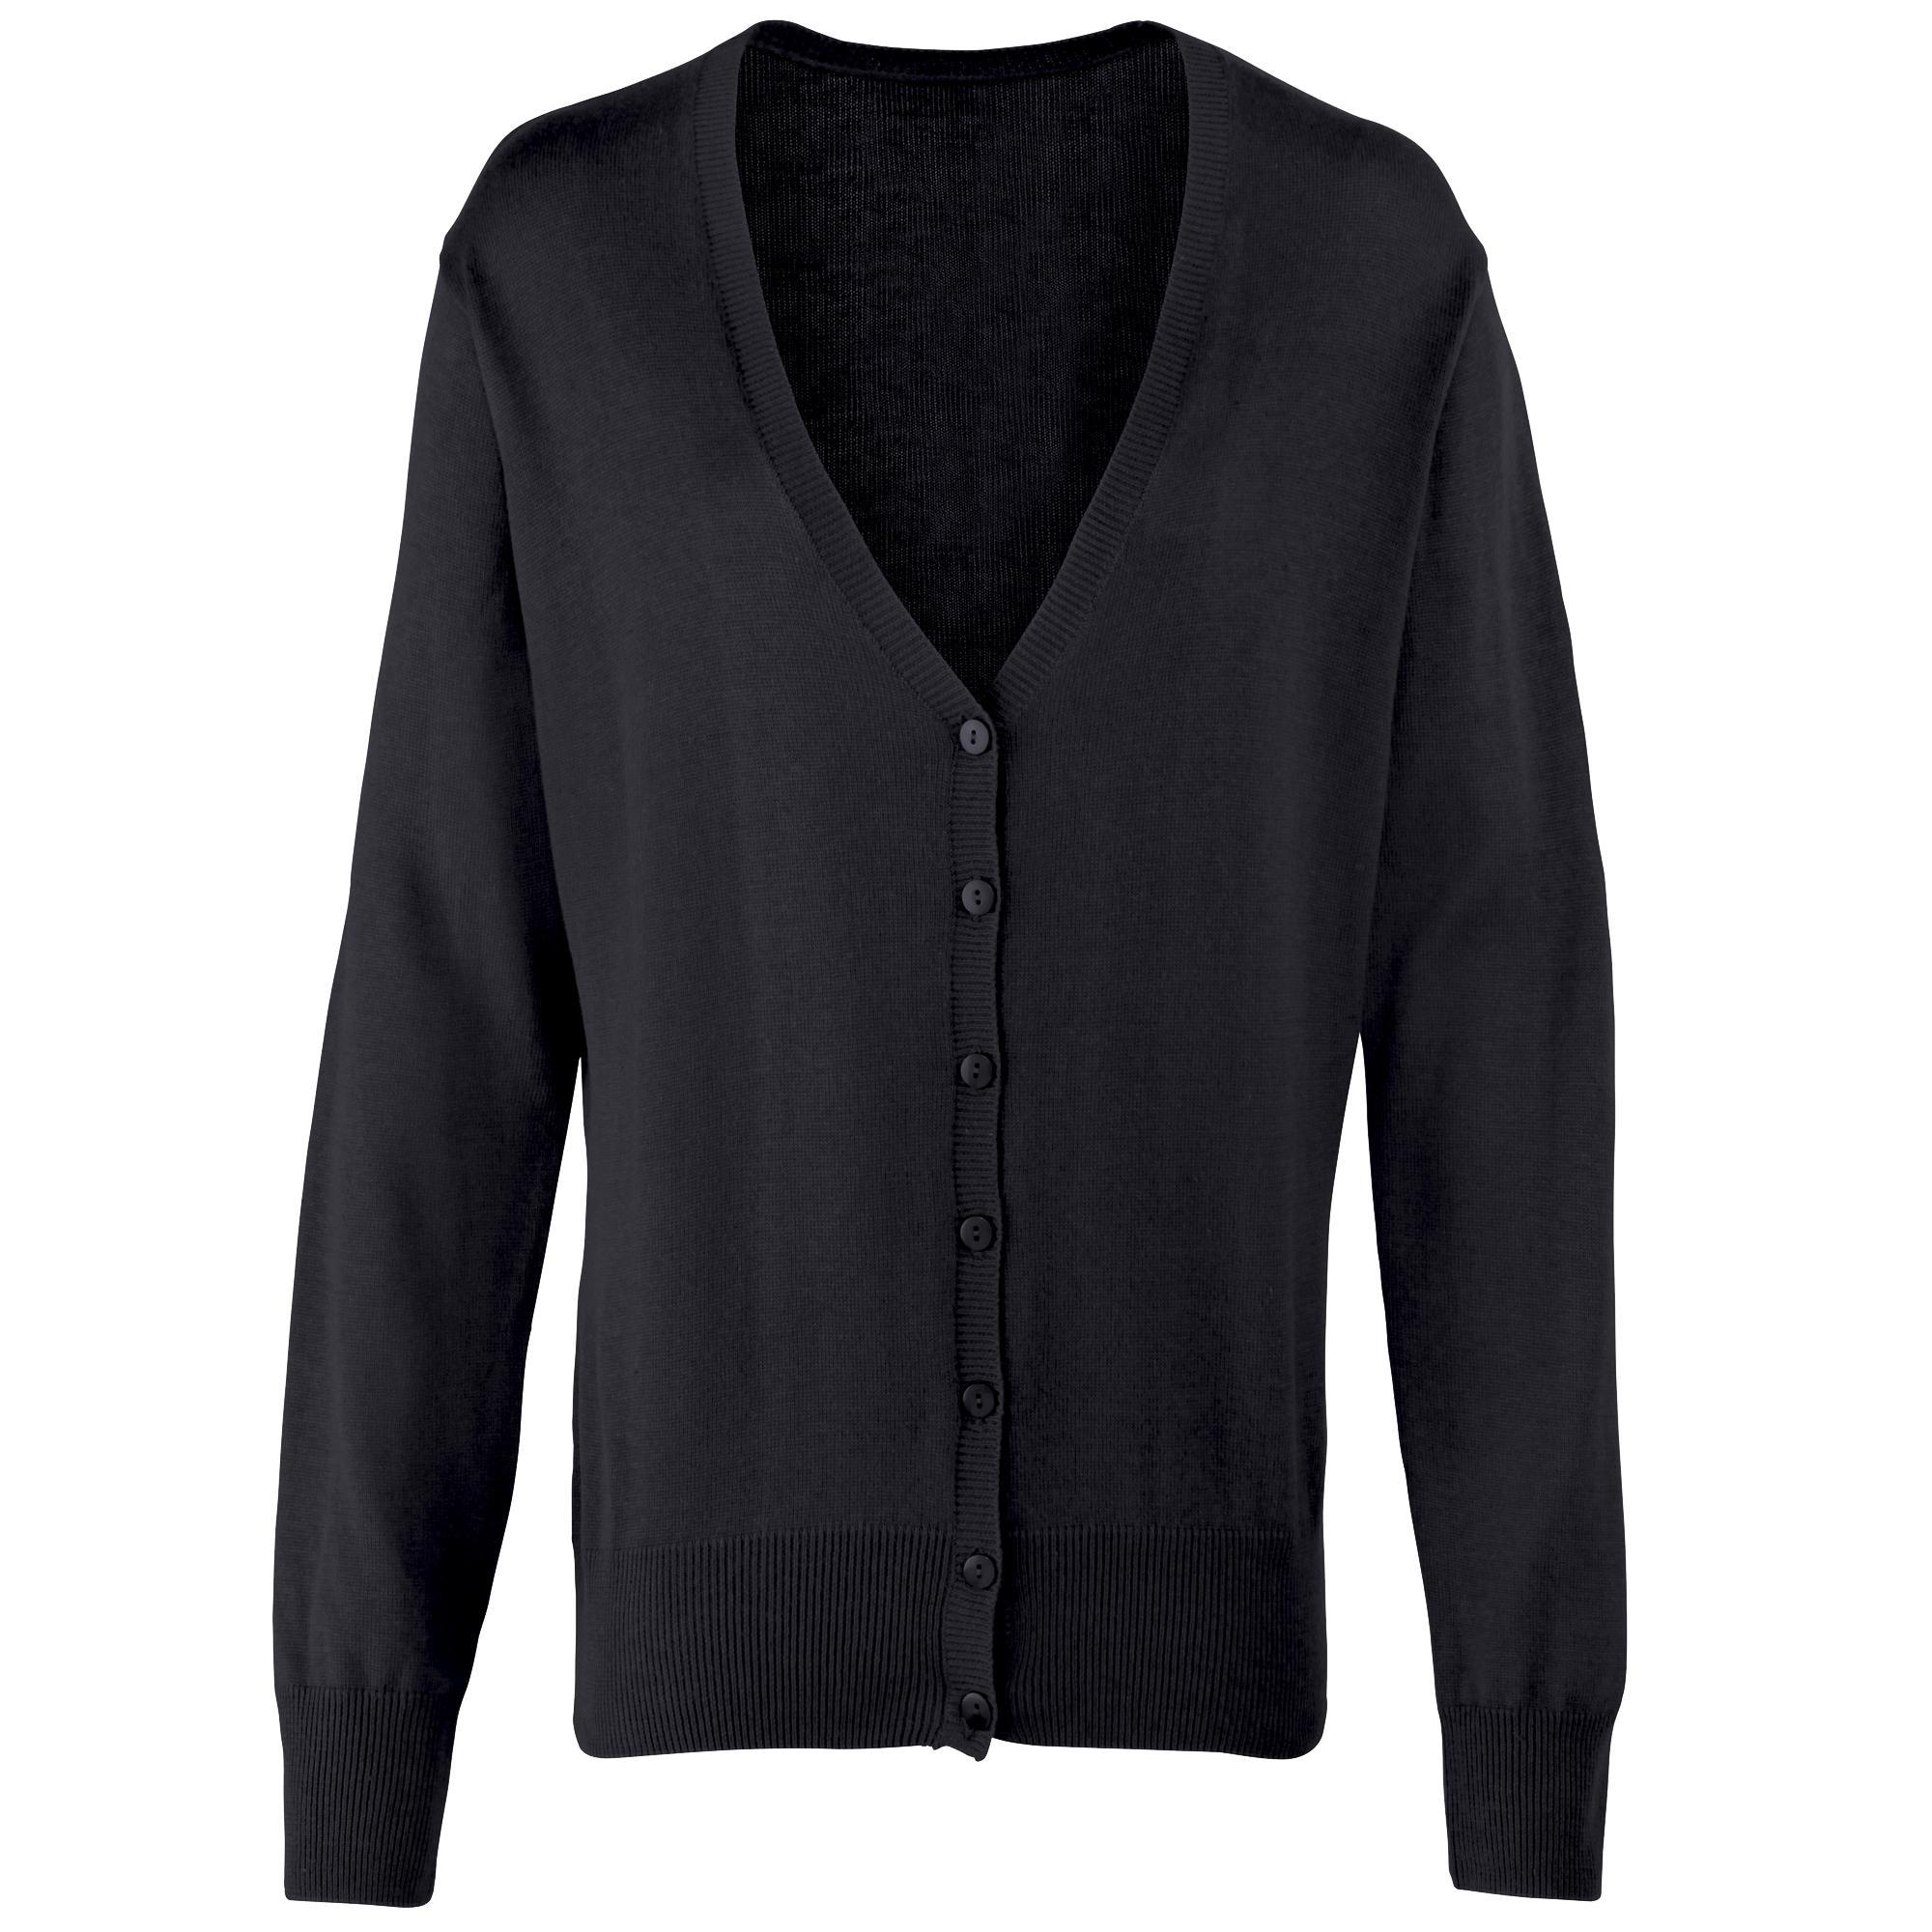 Premier Womens/Ladies Button Through Long Sleeve V-neck Knitted Cardigan (Black) (10)